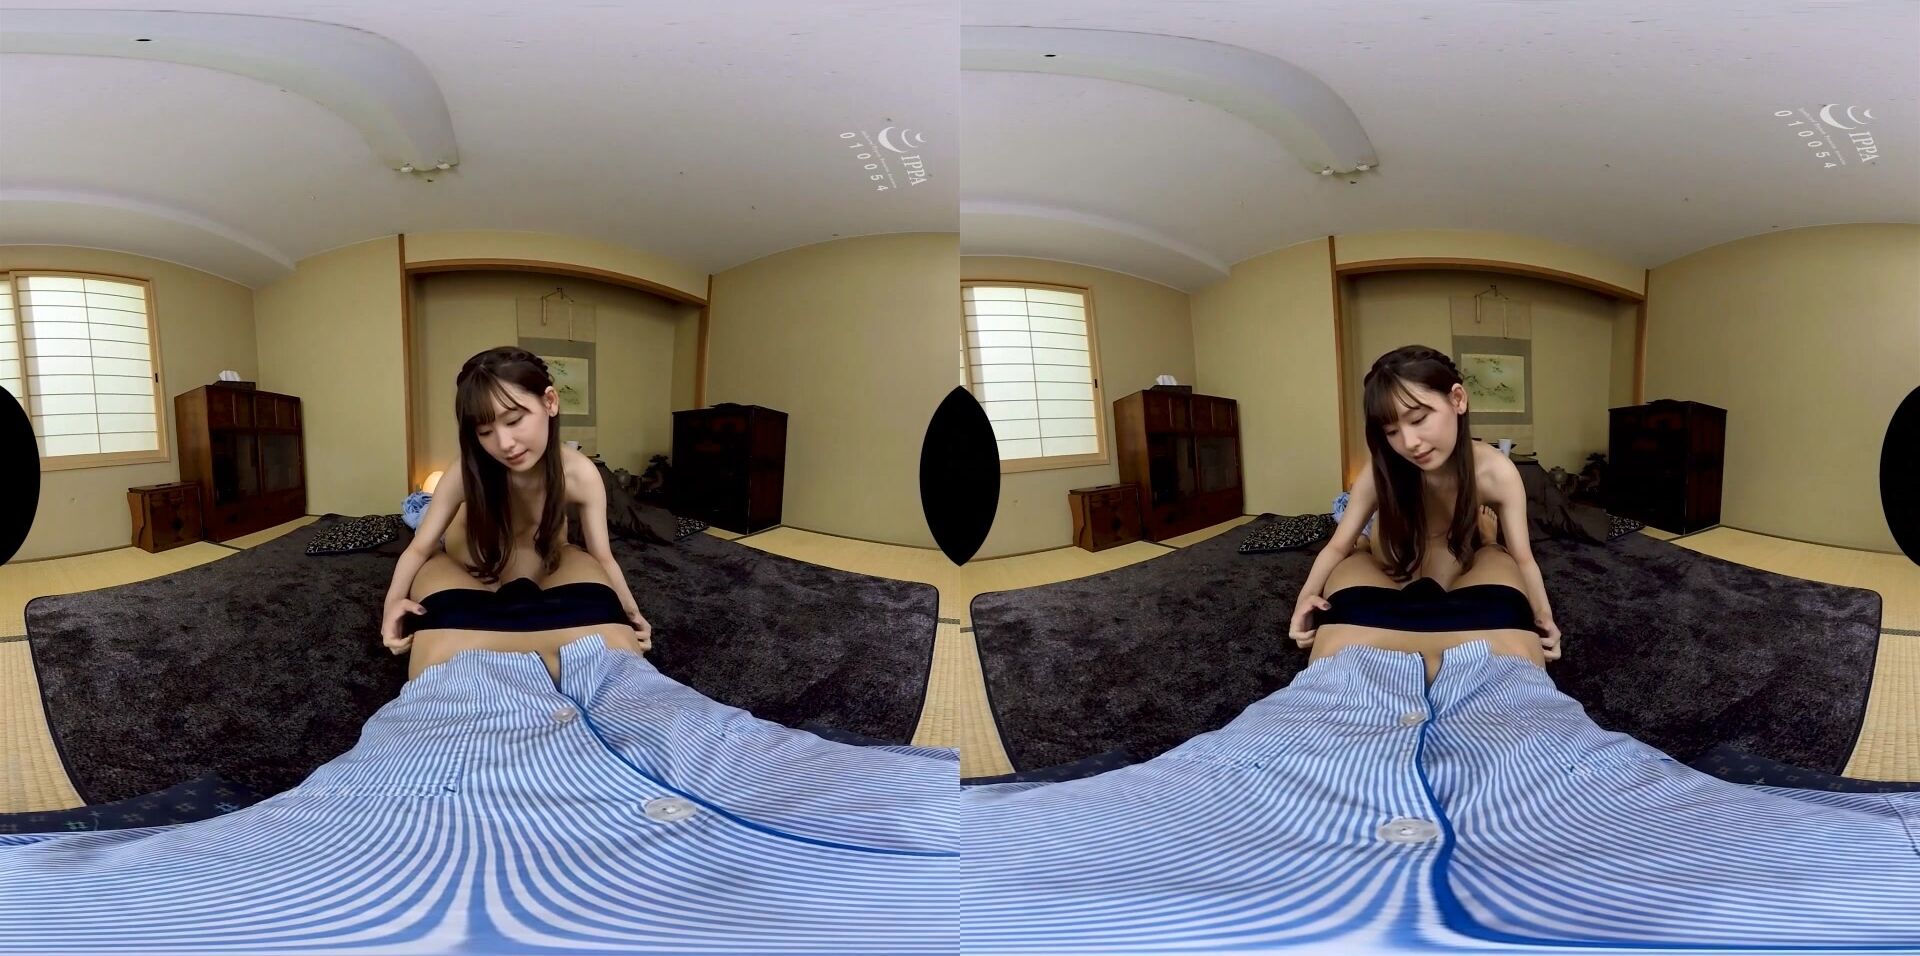 Yui Aragaki lets you freely use her pussy as much as you want in VR